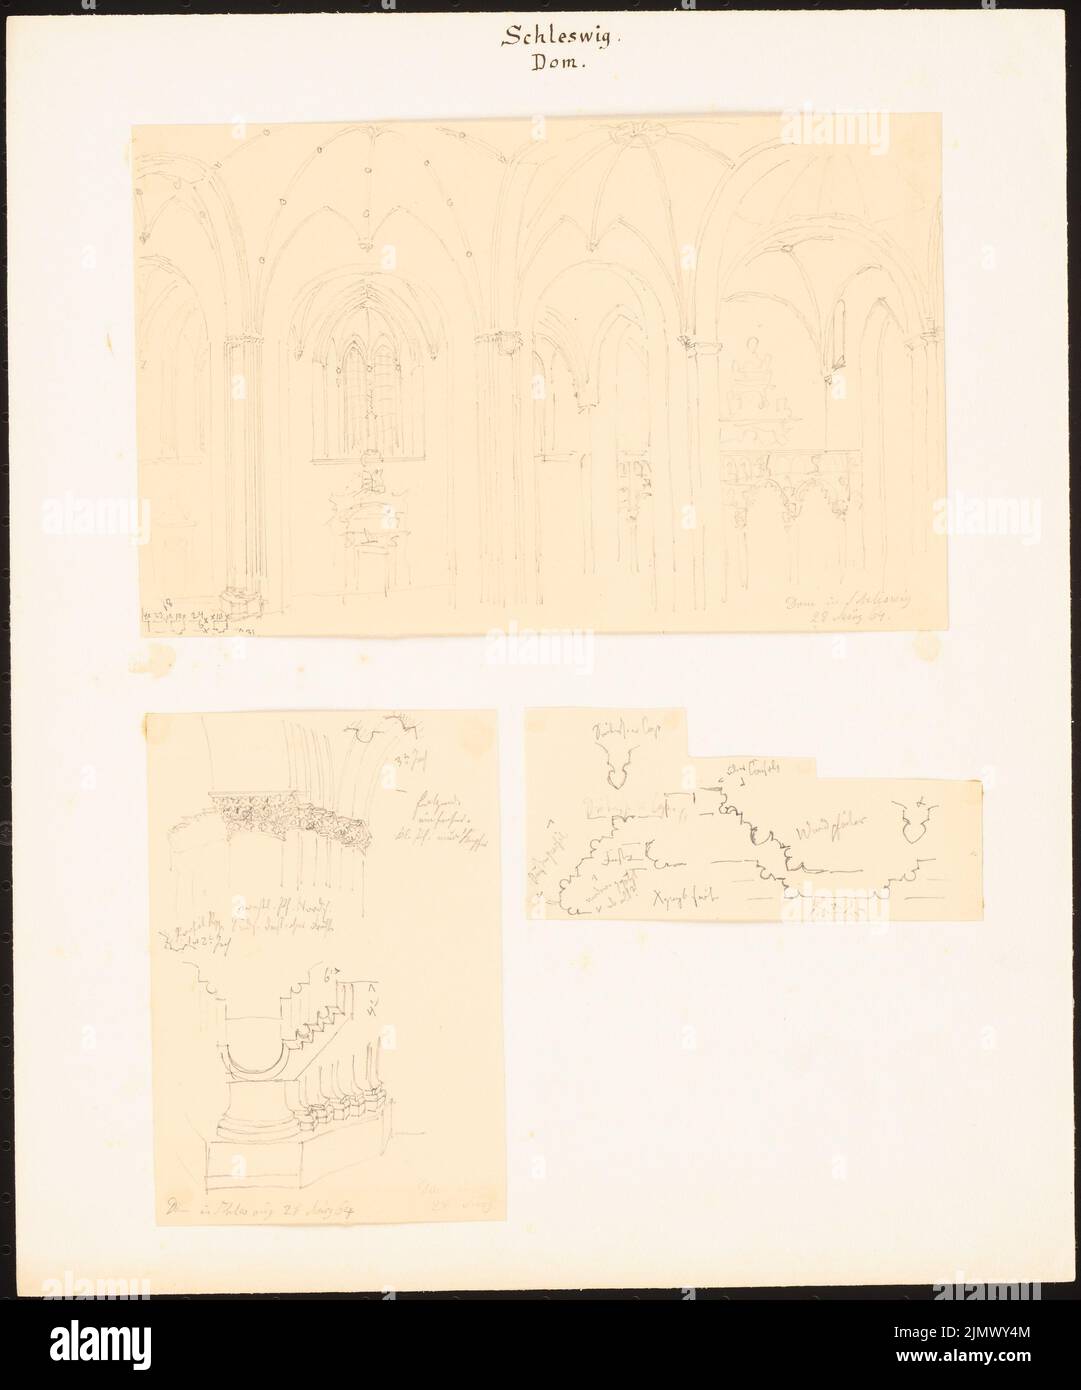 Quast Ferdinand von (1807-1877), Cathedral St. Peter in Schleswig (March 30, 1864): Three leaves: Perspective interior view, View Western pillars of the north-ship: Basis and Capitell, pillar profiles. Pencil on paper, 34.9 x 29 cm (including scan edges) Quast Ferdinand von  (1807-1877): Dom St. Peter, Schleswig Stock Photo